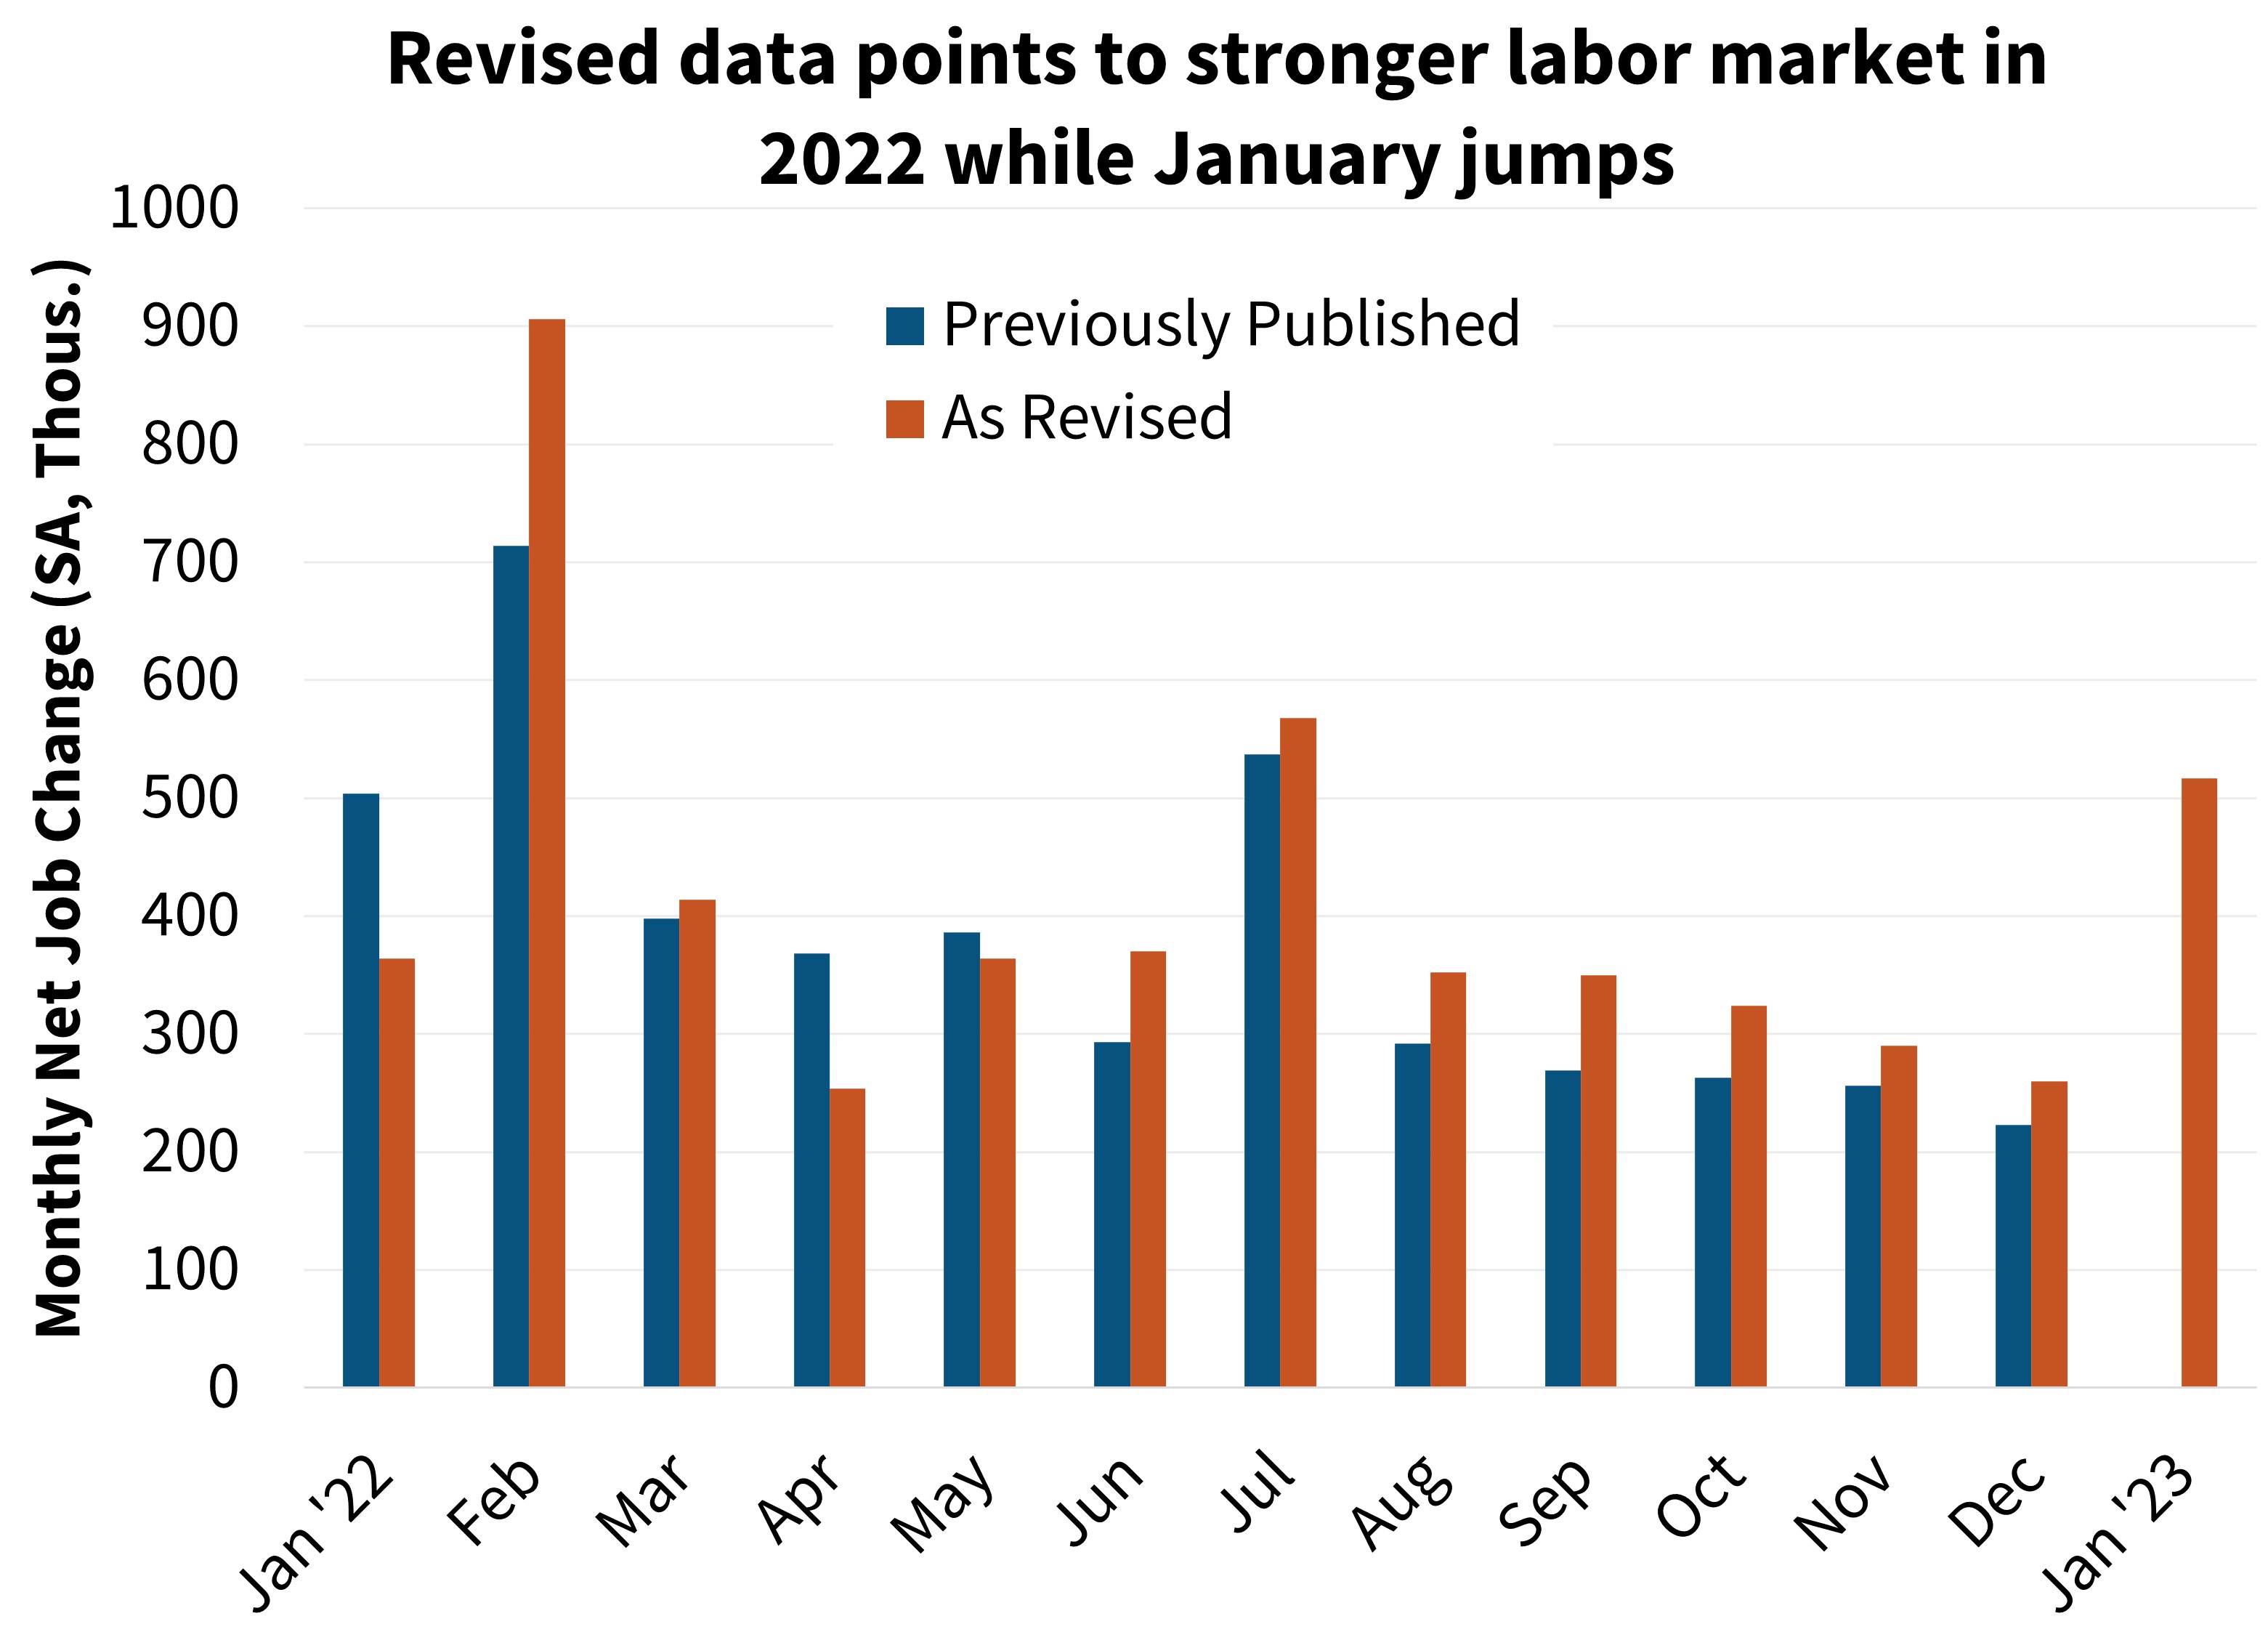  Revised data points to stronger labor market in 2022 while January jumps 